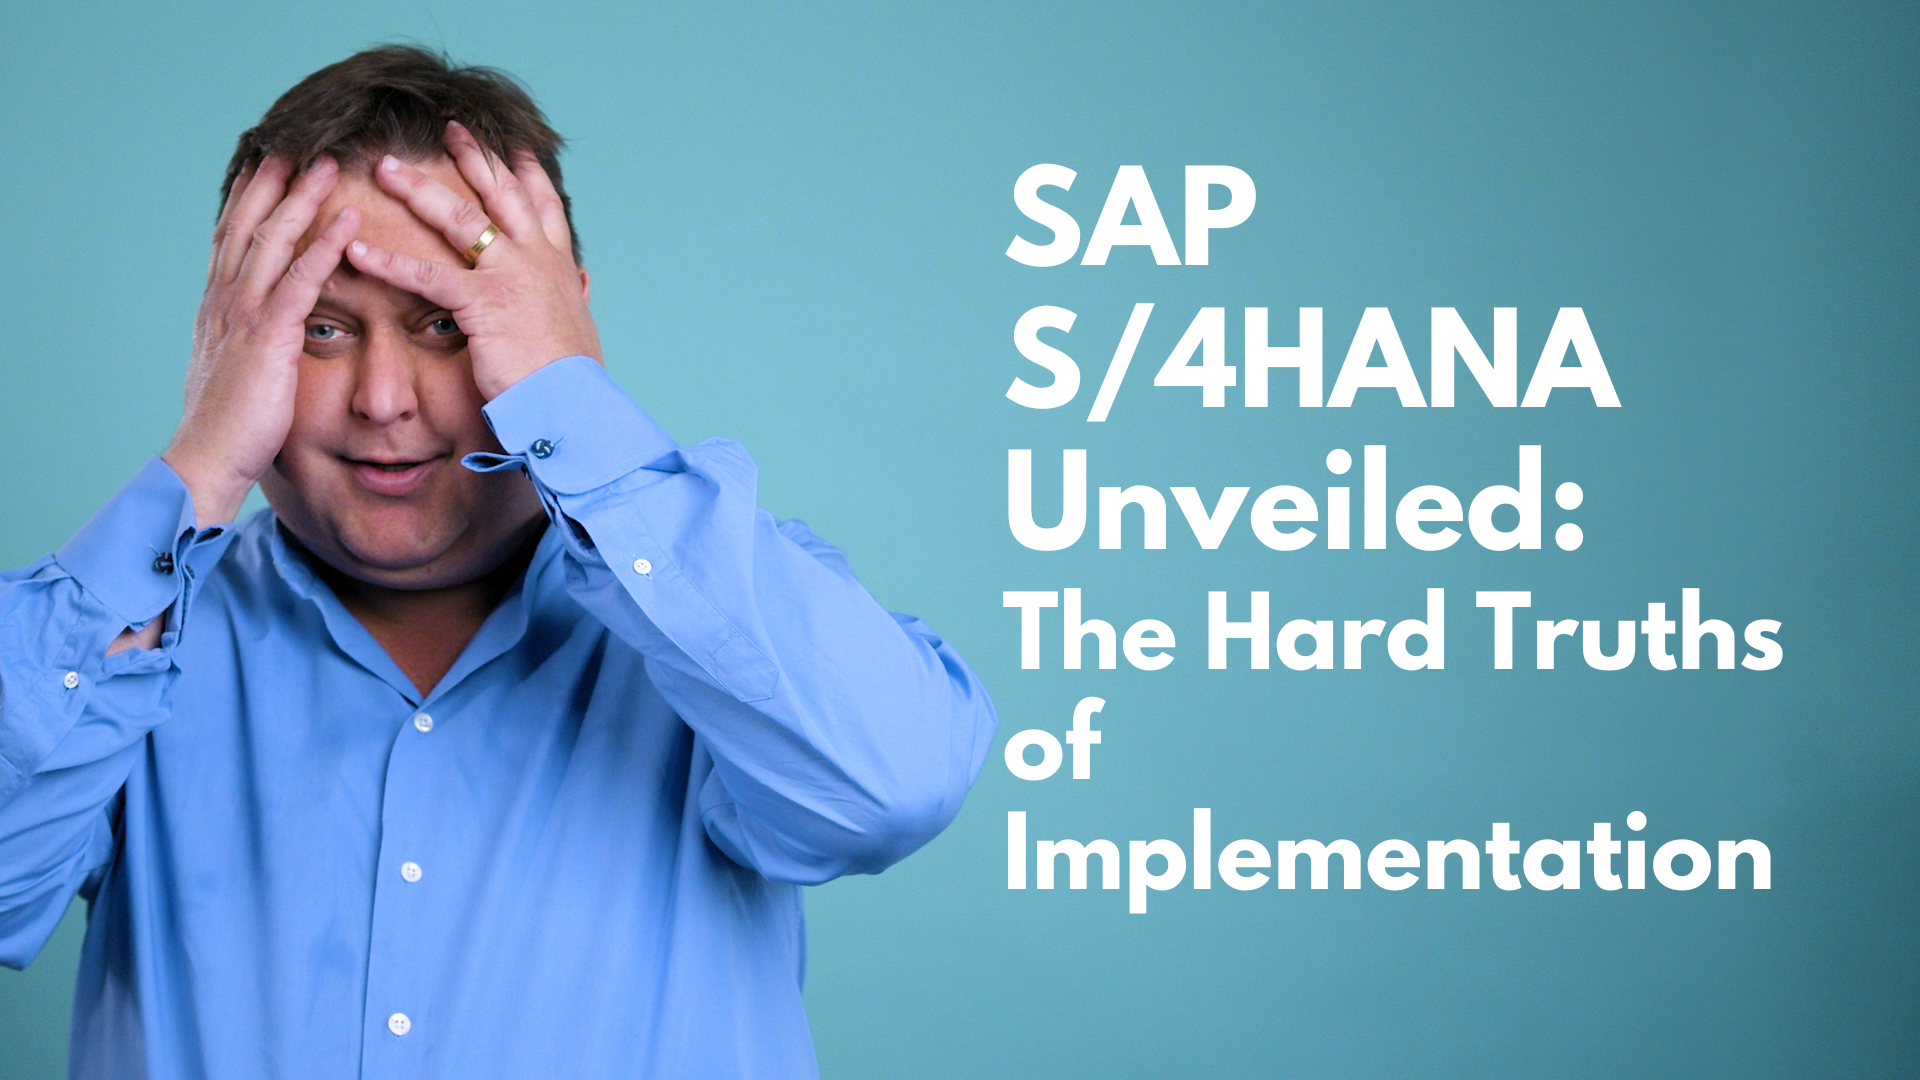 SAP S4HANA Unveiled The Hard Truths of Implementation